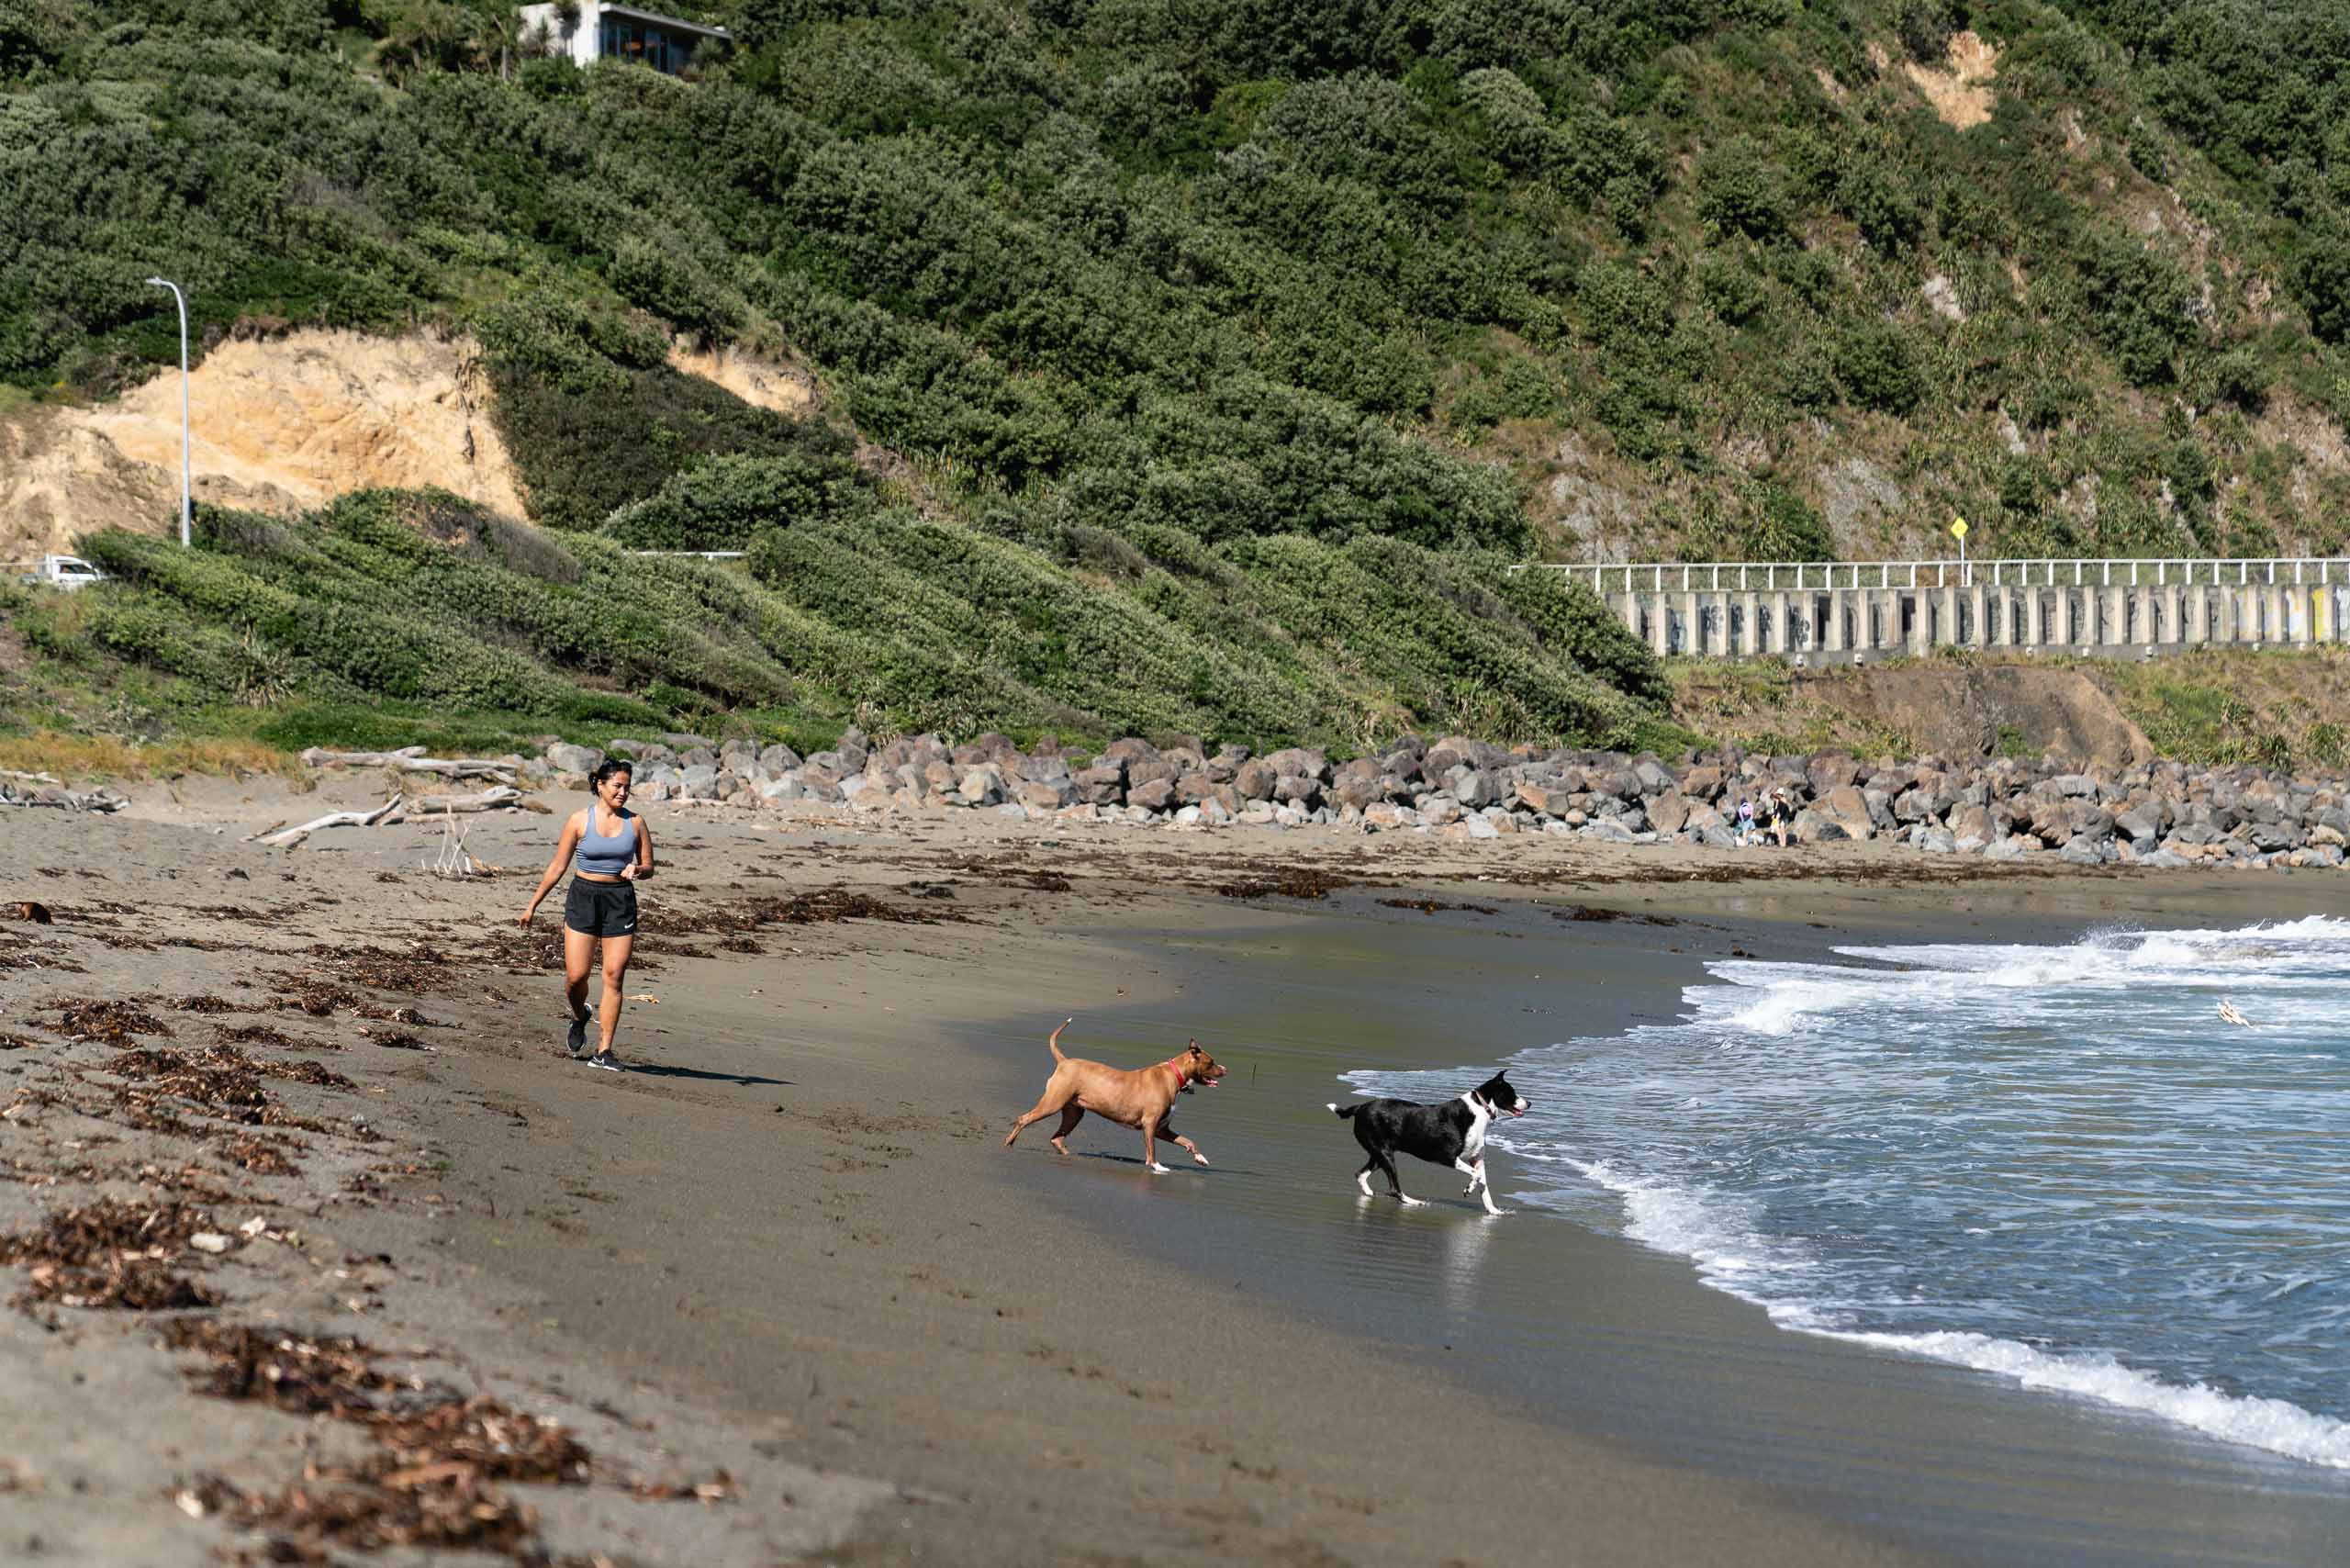 Tricia and the dogs on the beach in Wellington.